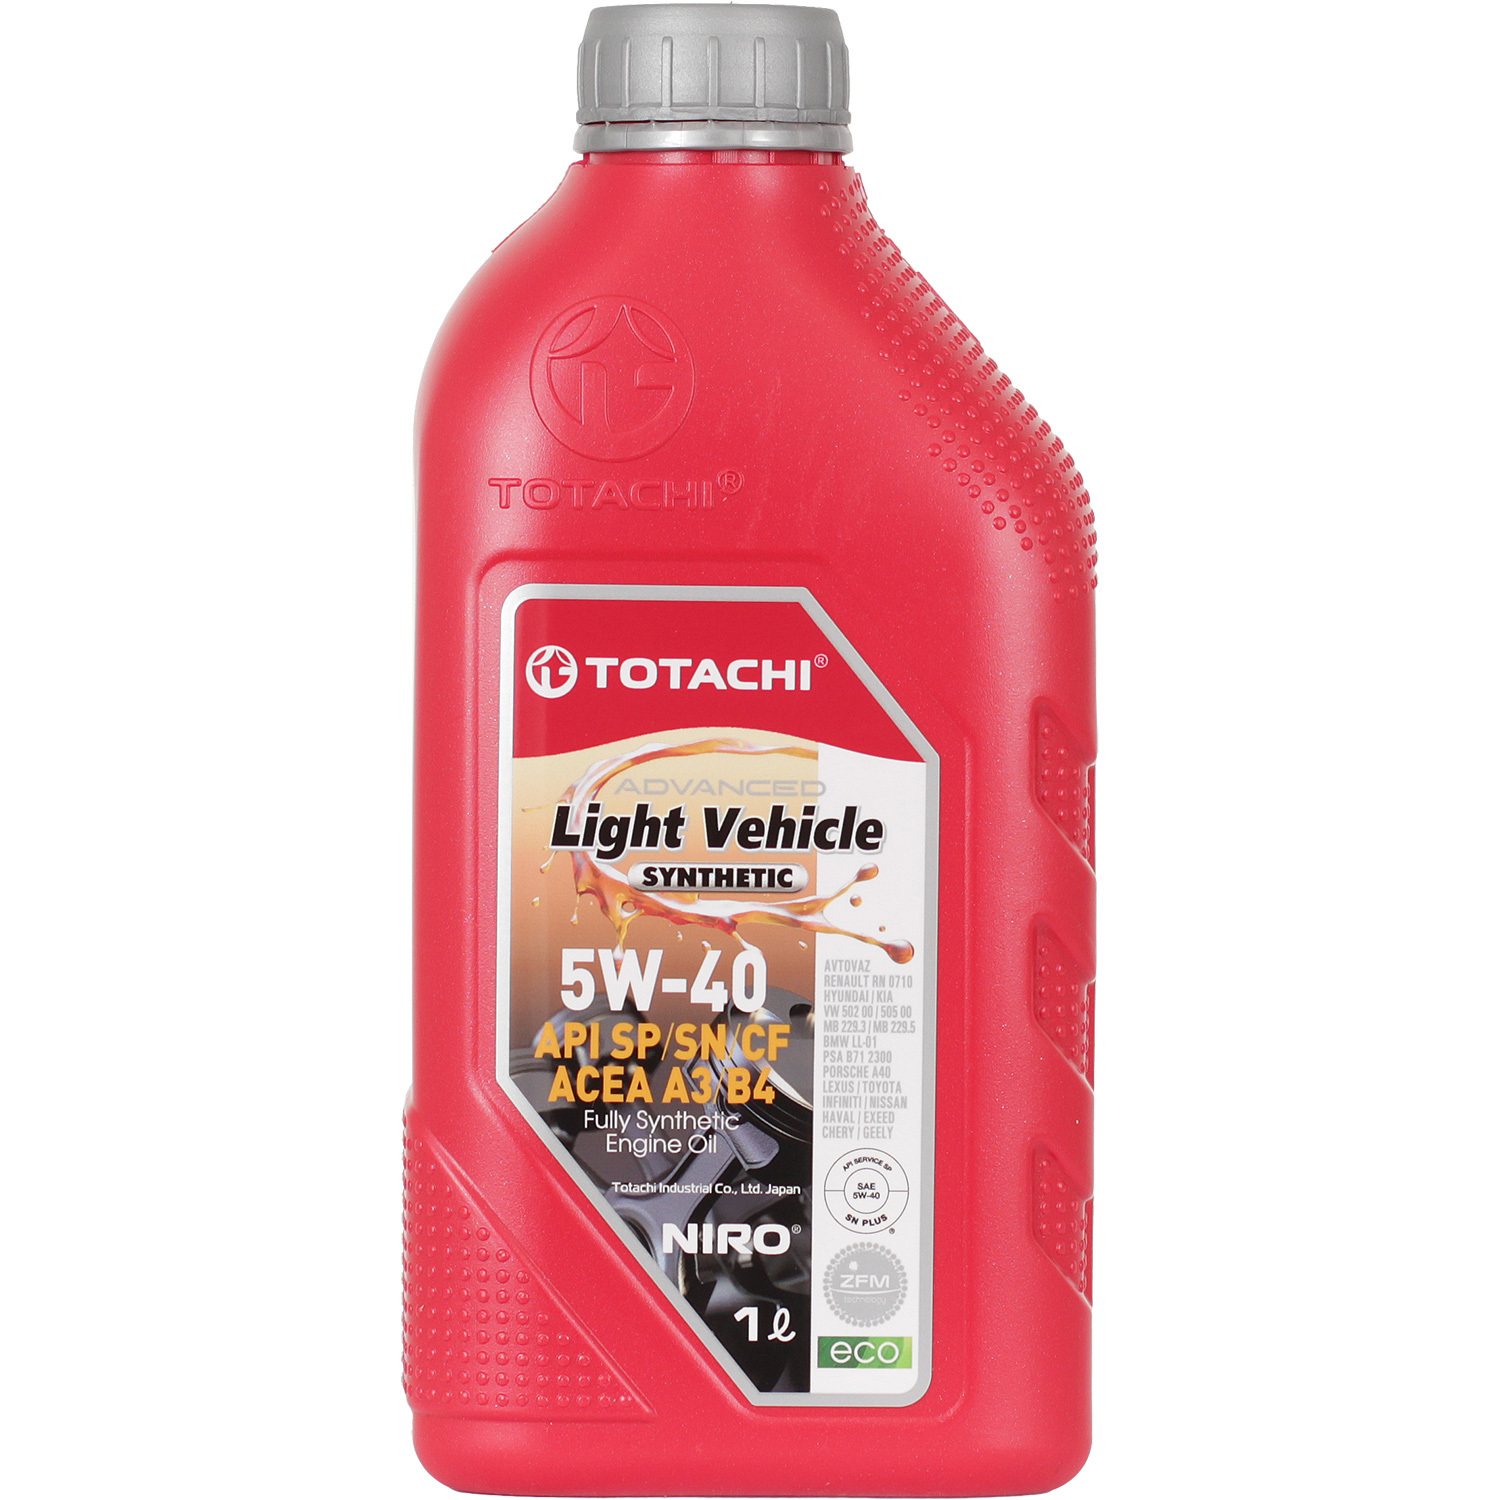 Totachi Моторное масло Totachi NIRO LV Synthetic 5W-40, 1 л масло моторное autobacs 5 40 synthetic синтетическое sp cf 1 л a00032431